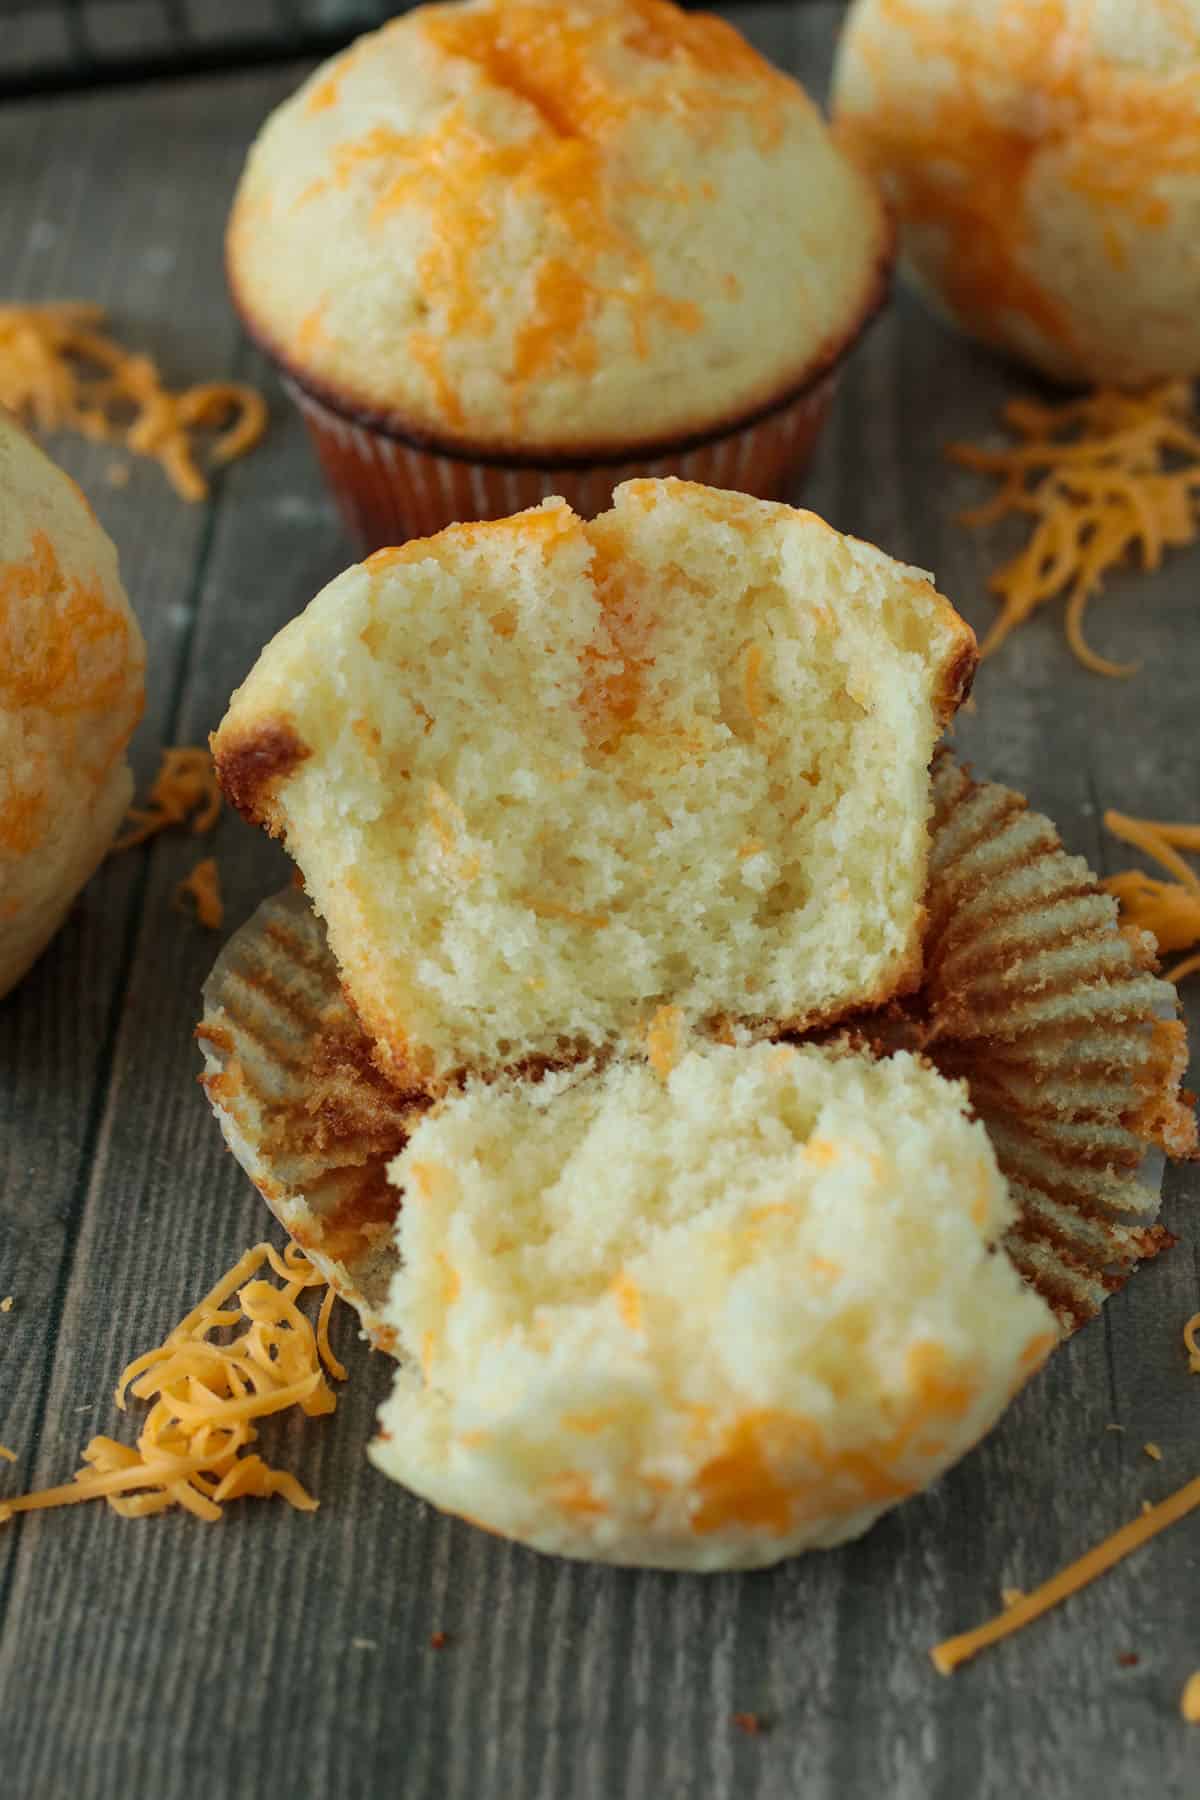 A cheese cupcake sliced in half to show the crumbs.